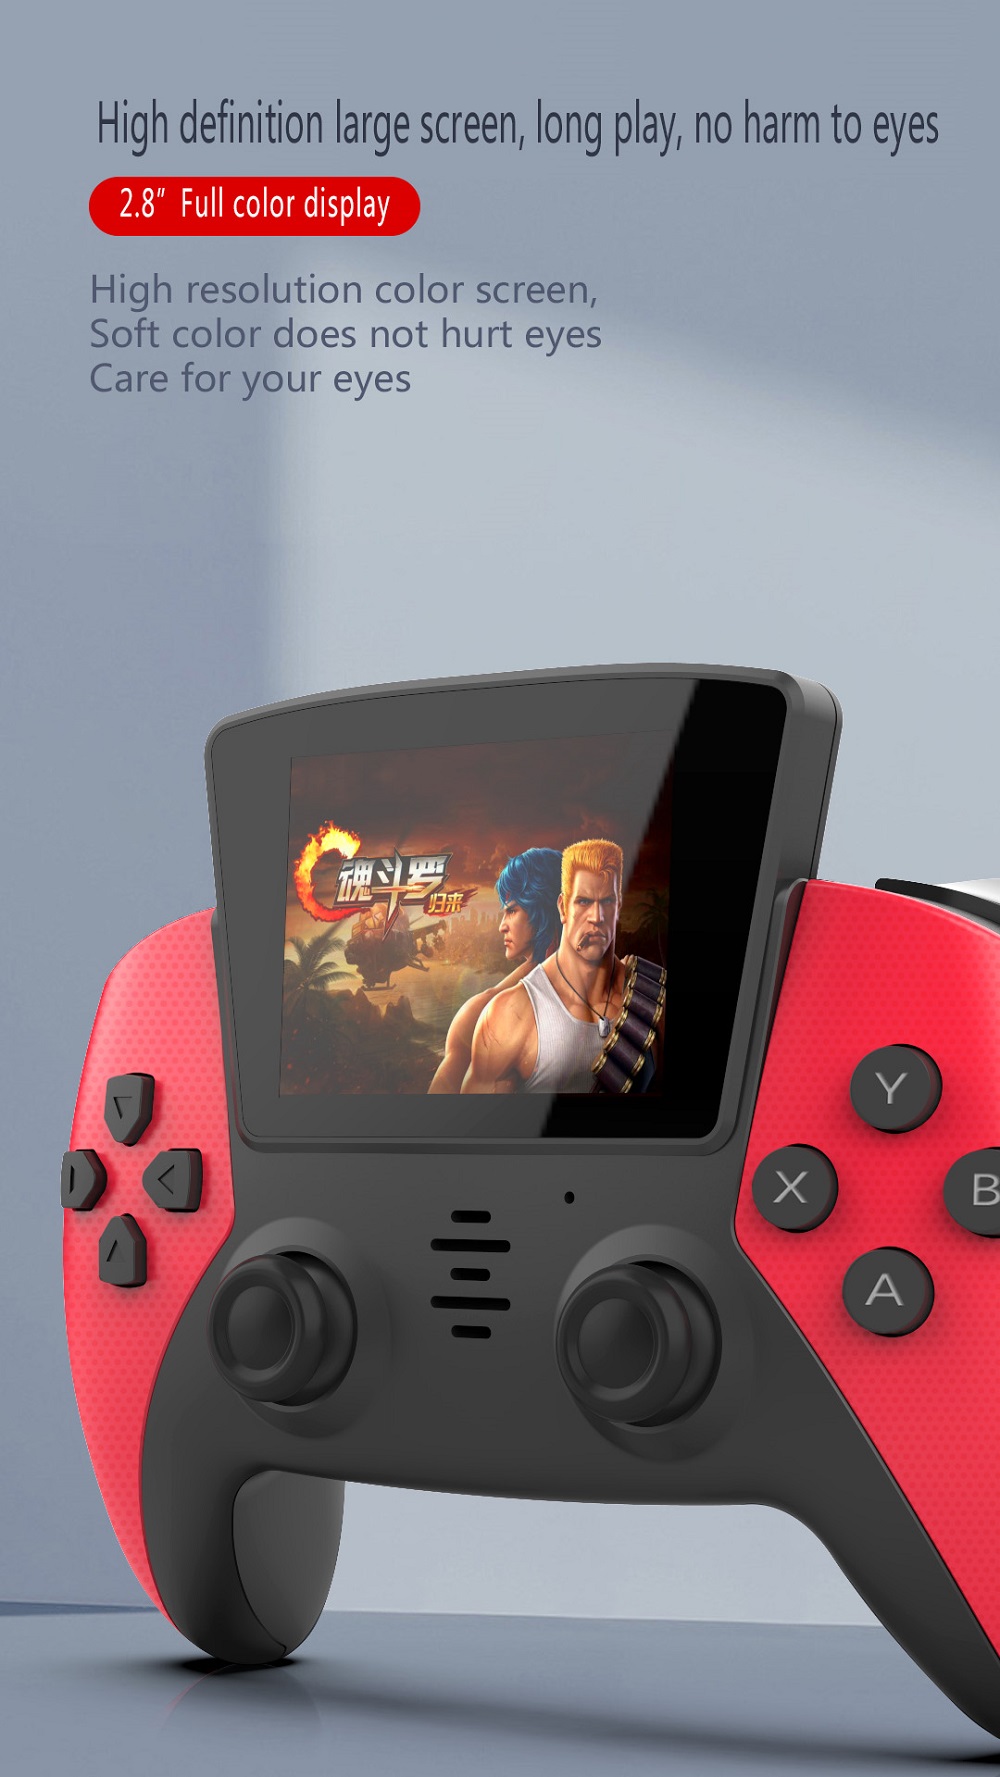 D6-Handheld-Game-Console-Gamepad-Retro-Video-Game-Consoles-Built-in-2000-Games-Support-SFC-MD-NEOGEO-1940681-9